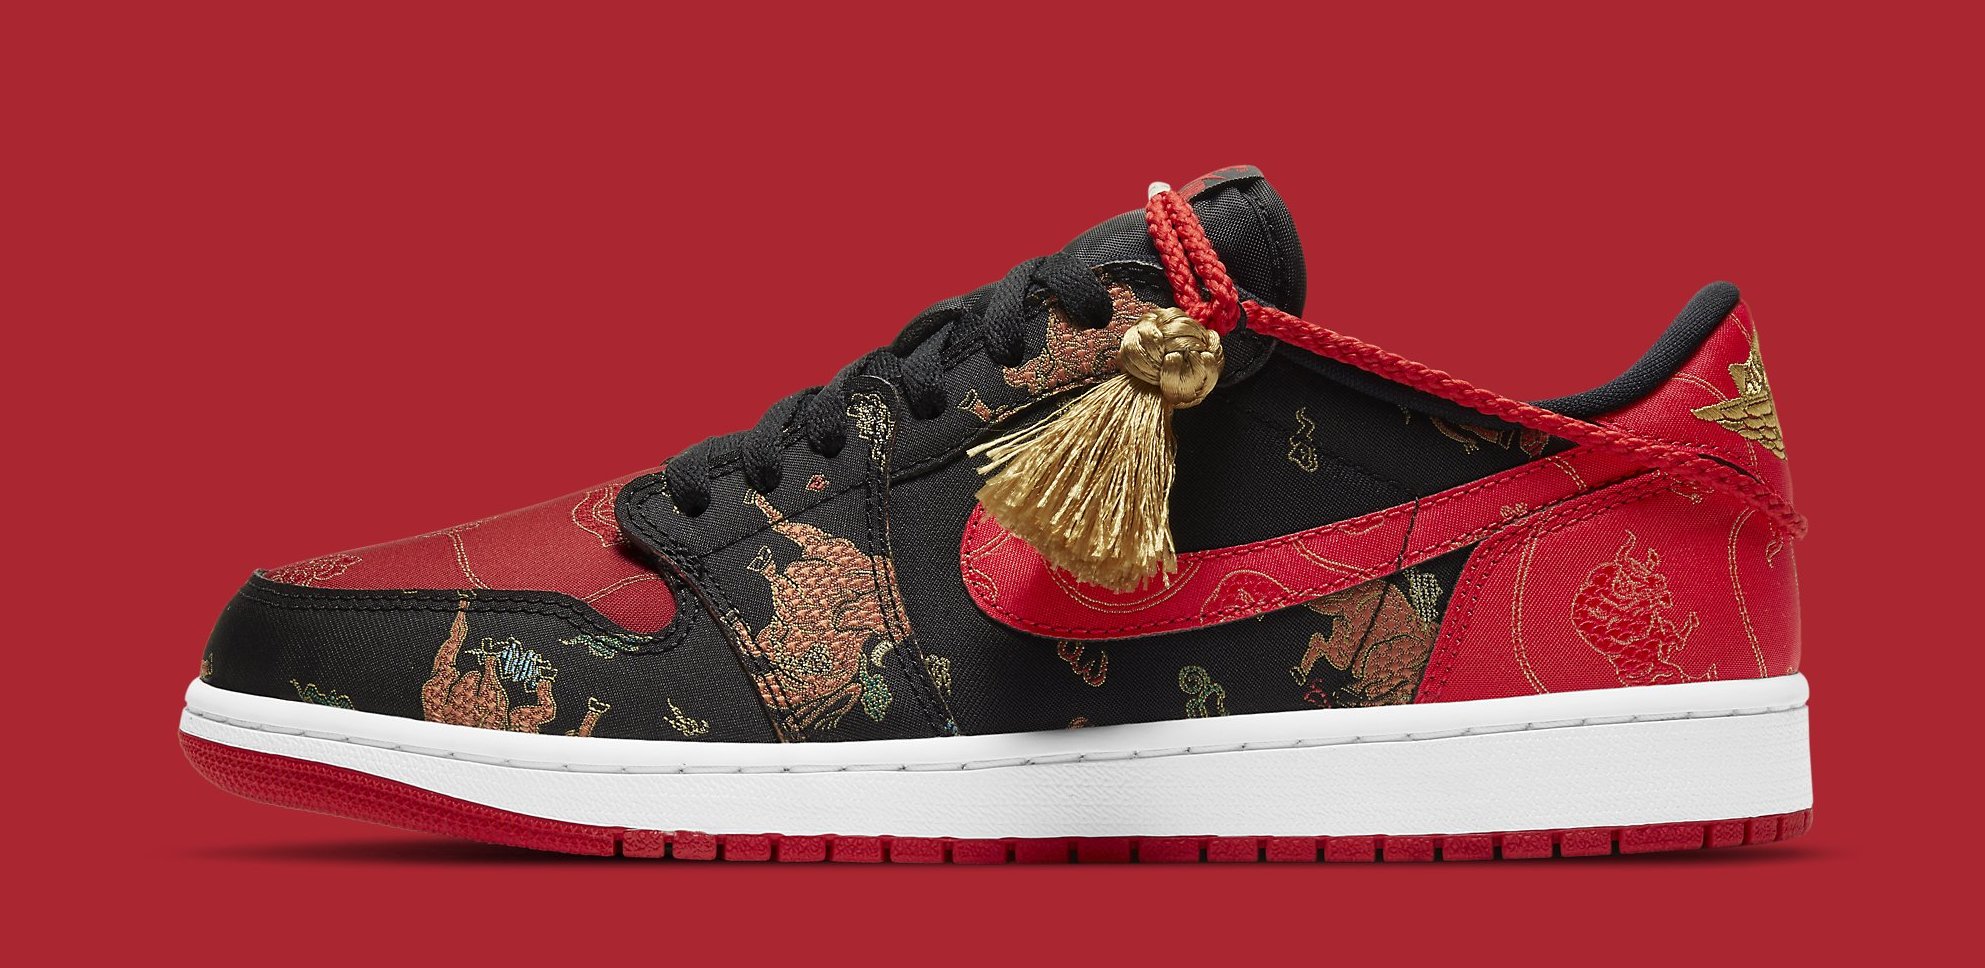 Air Jordan 1 Retro Low OG &#x27;Chinese New Year&#x27; DD2233 001 Lateral